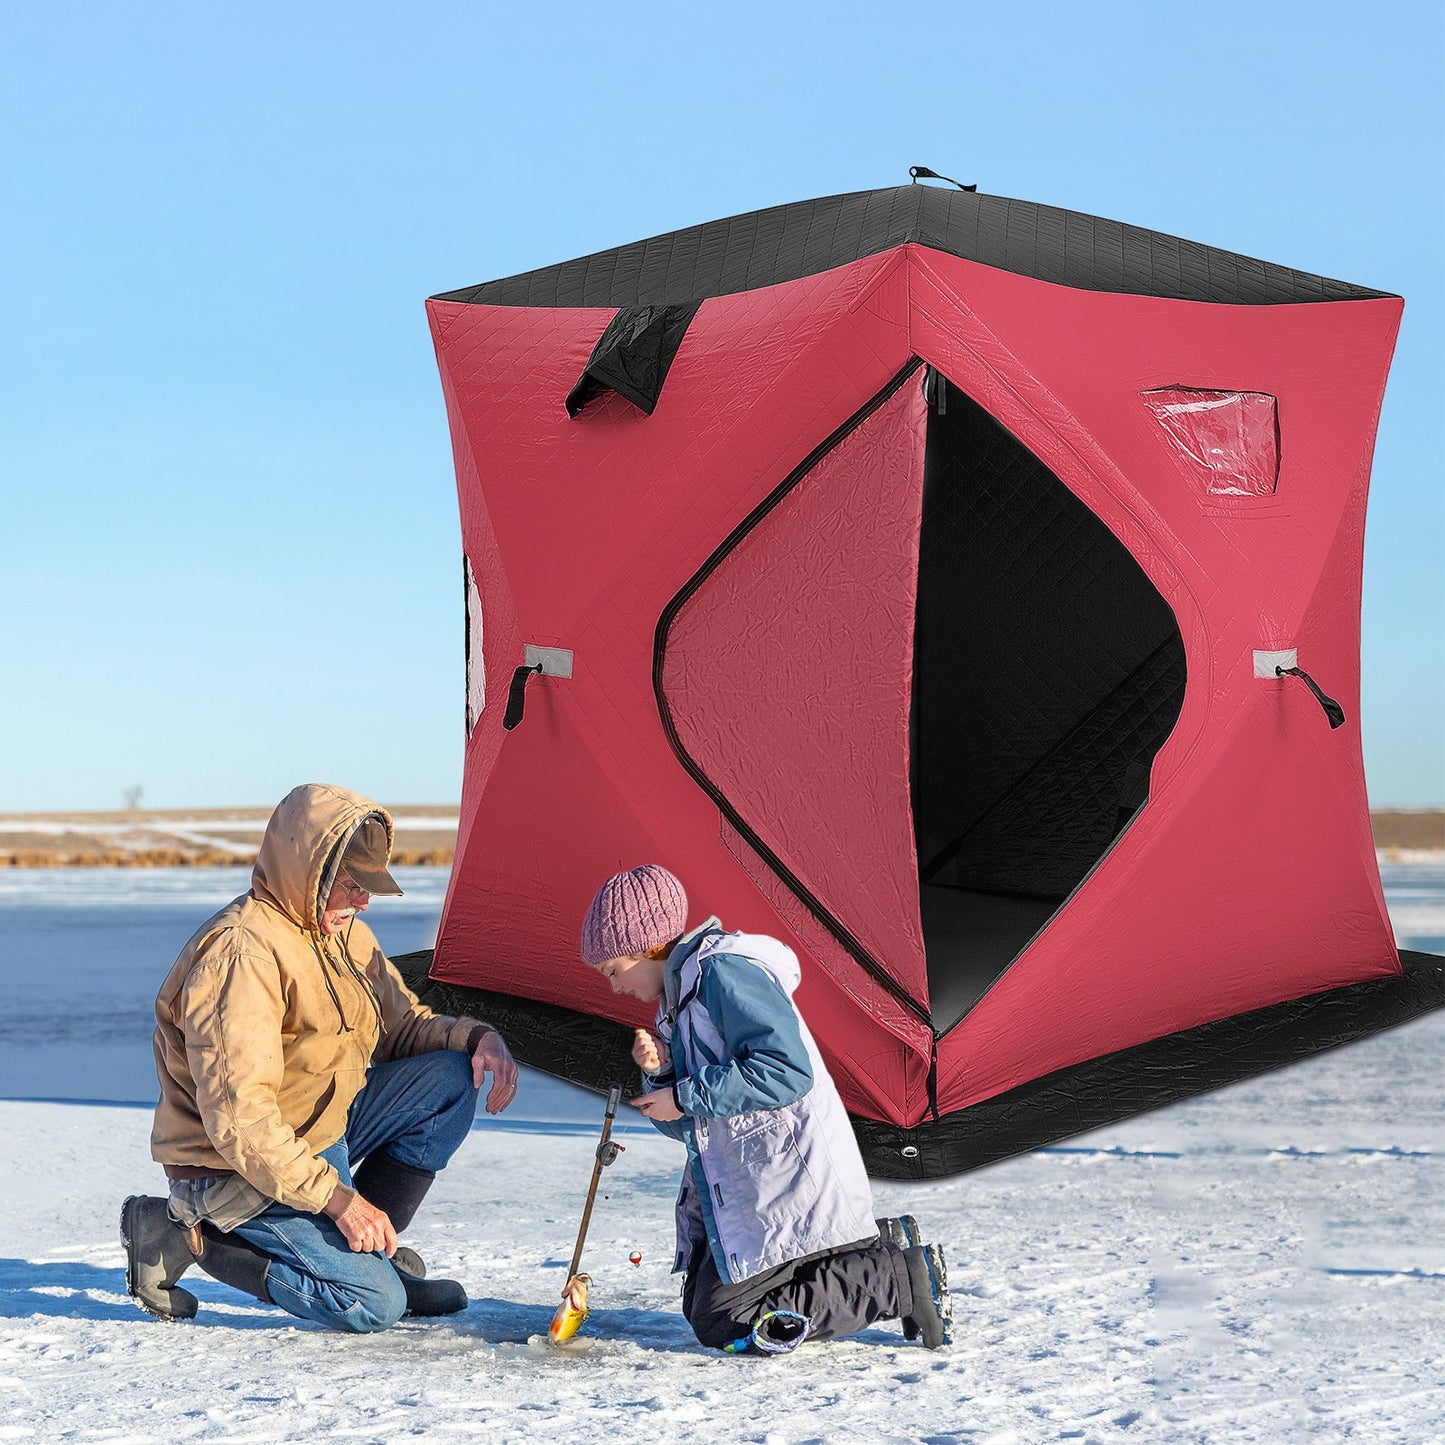 Portable 2 Person Ice Shanty with Cotton Padded Walls, Red